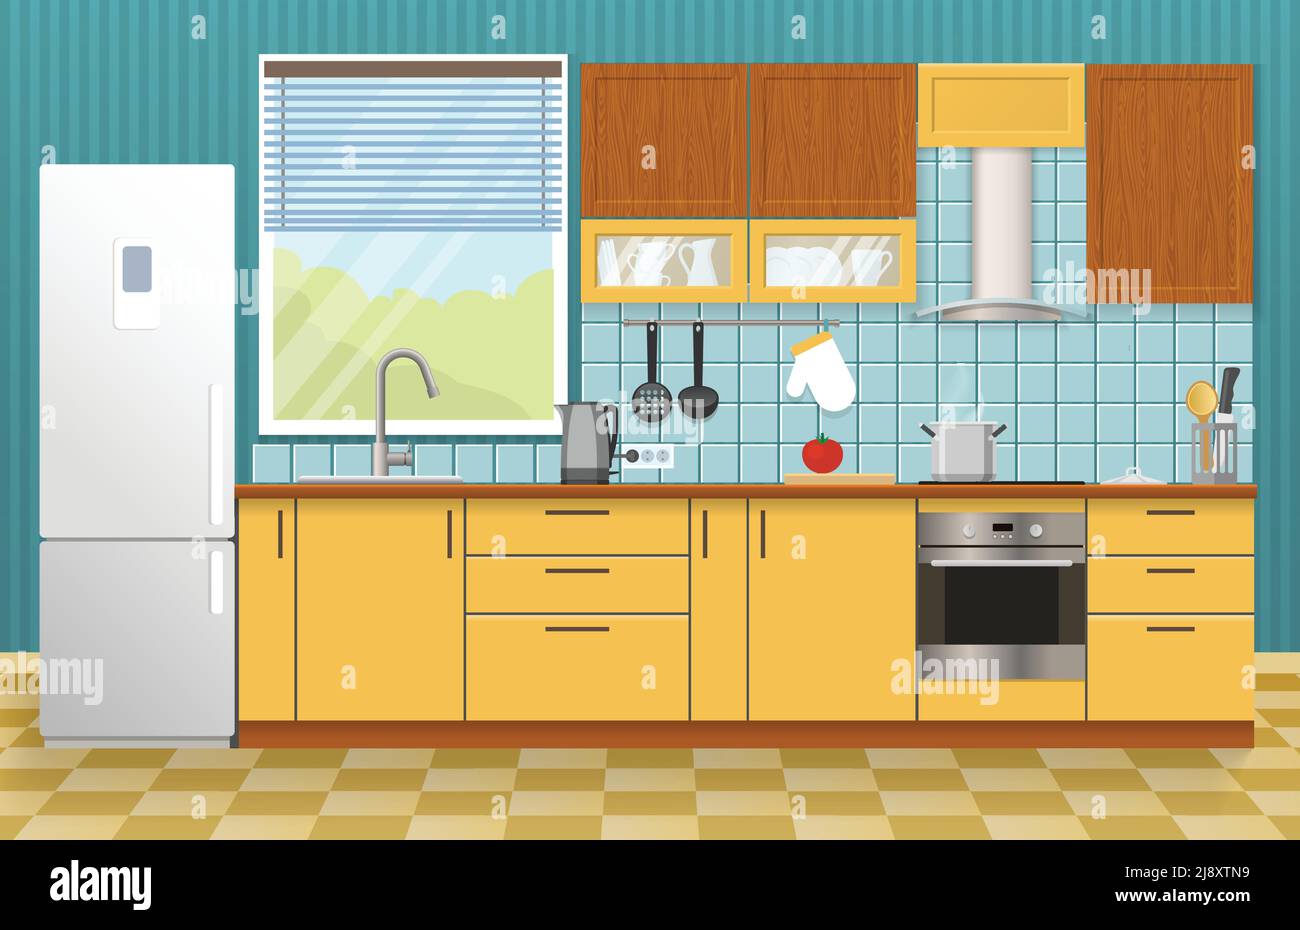 Kitchen interior concept with window yellow cupboards and cabinets blue textural wall and tiled floor vector illustration Stock Vector